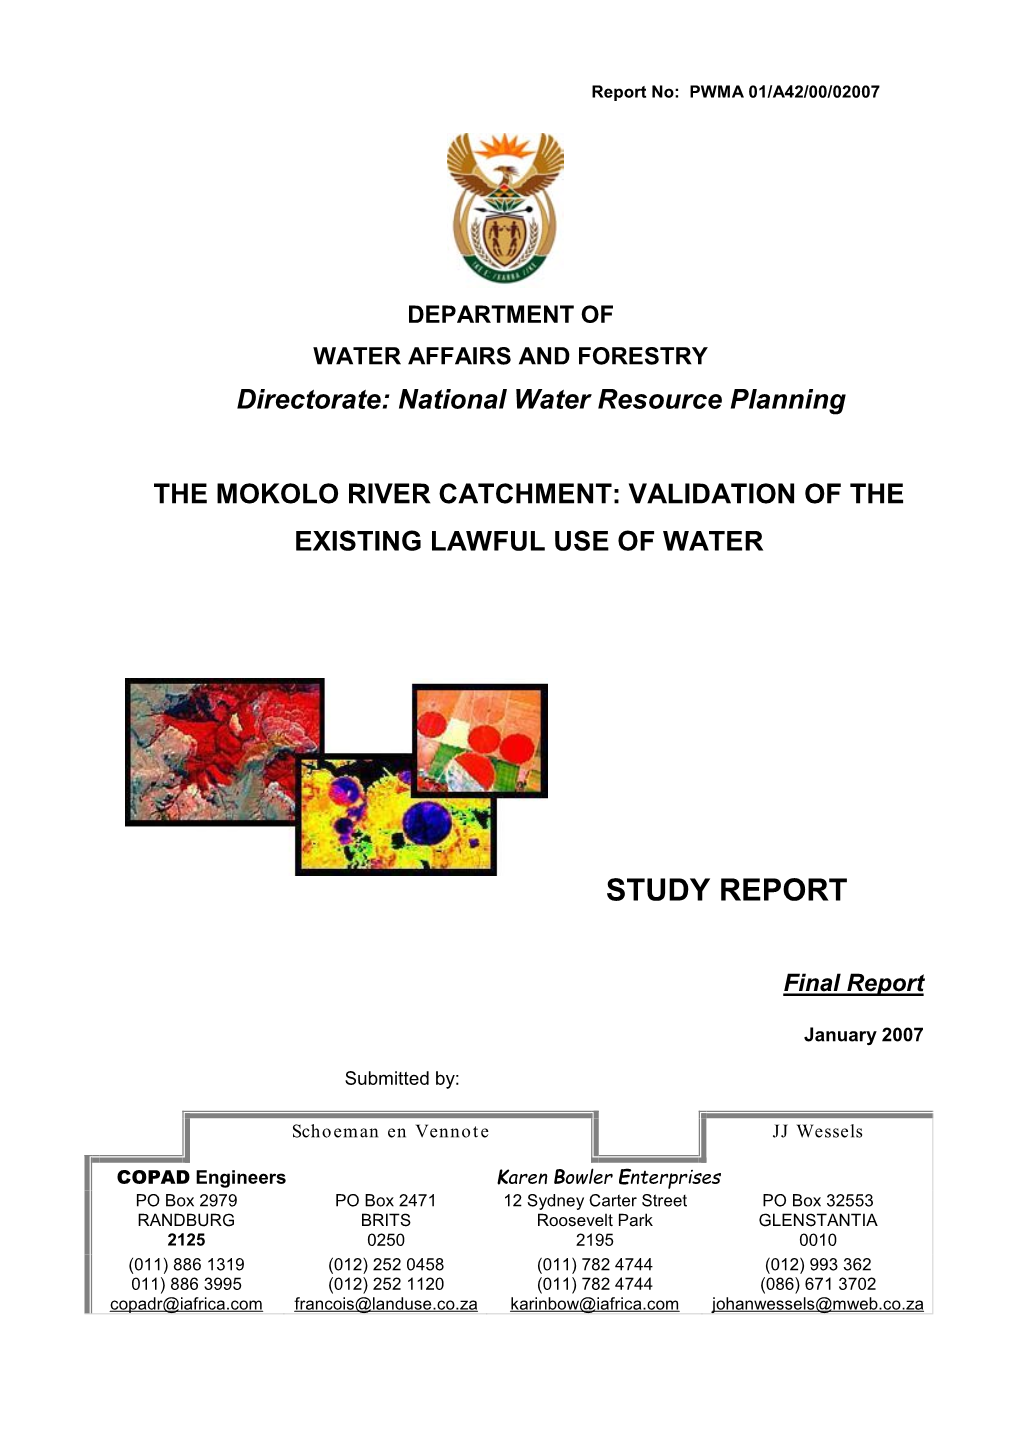 The Mokolo River Catchment: Validation of the Existing Lawful Use of Water